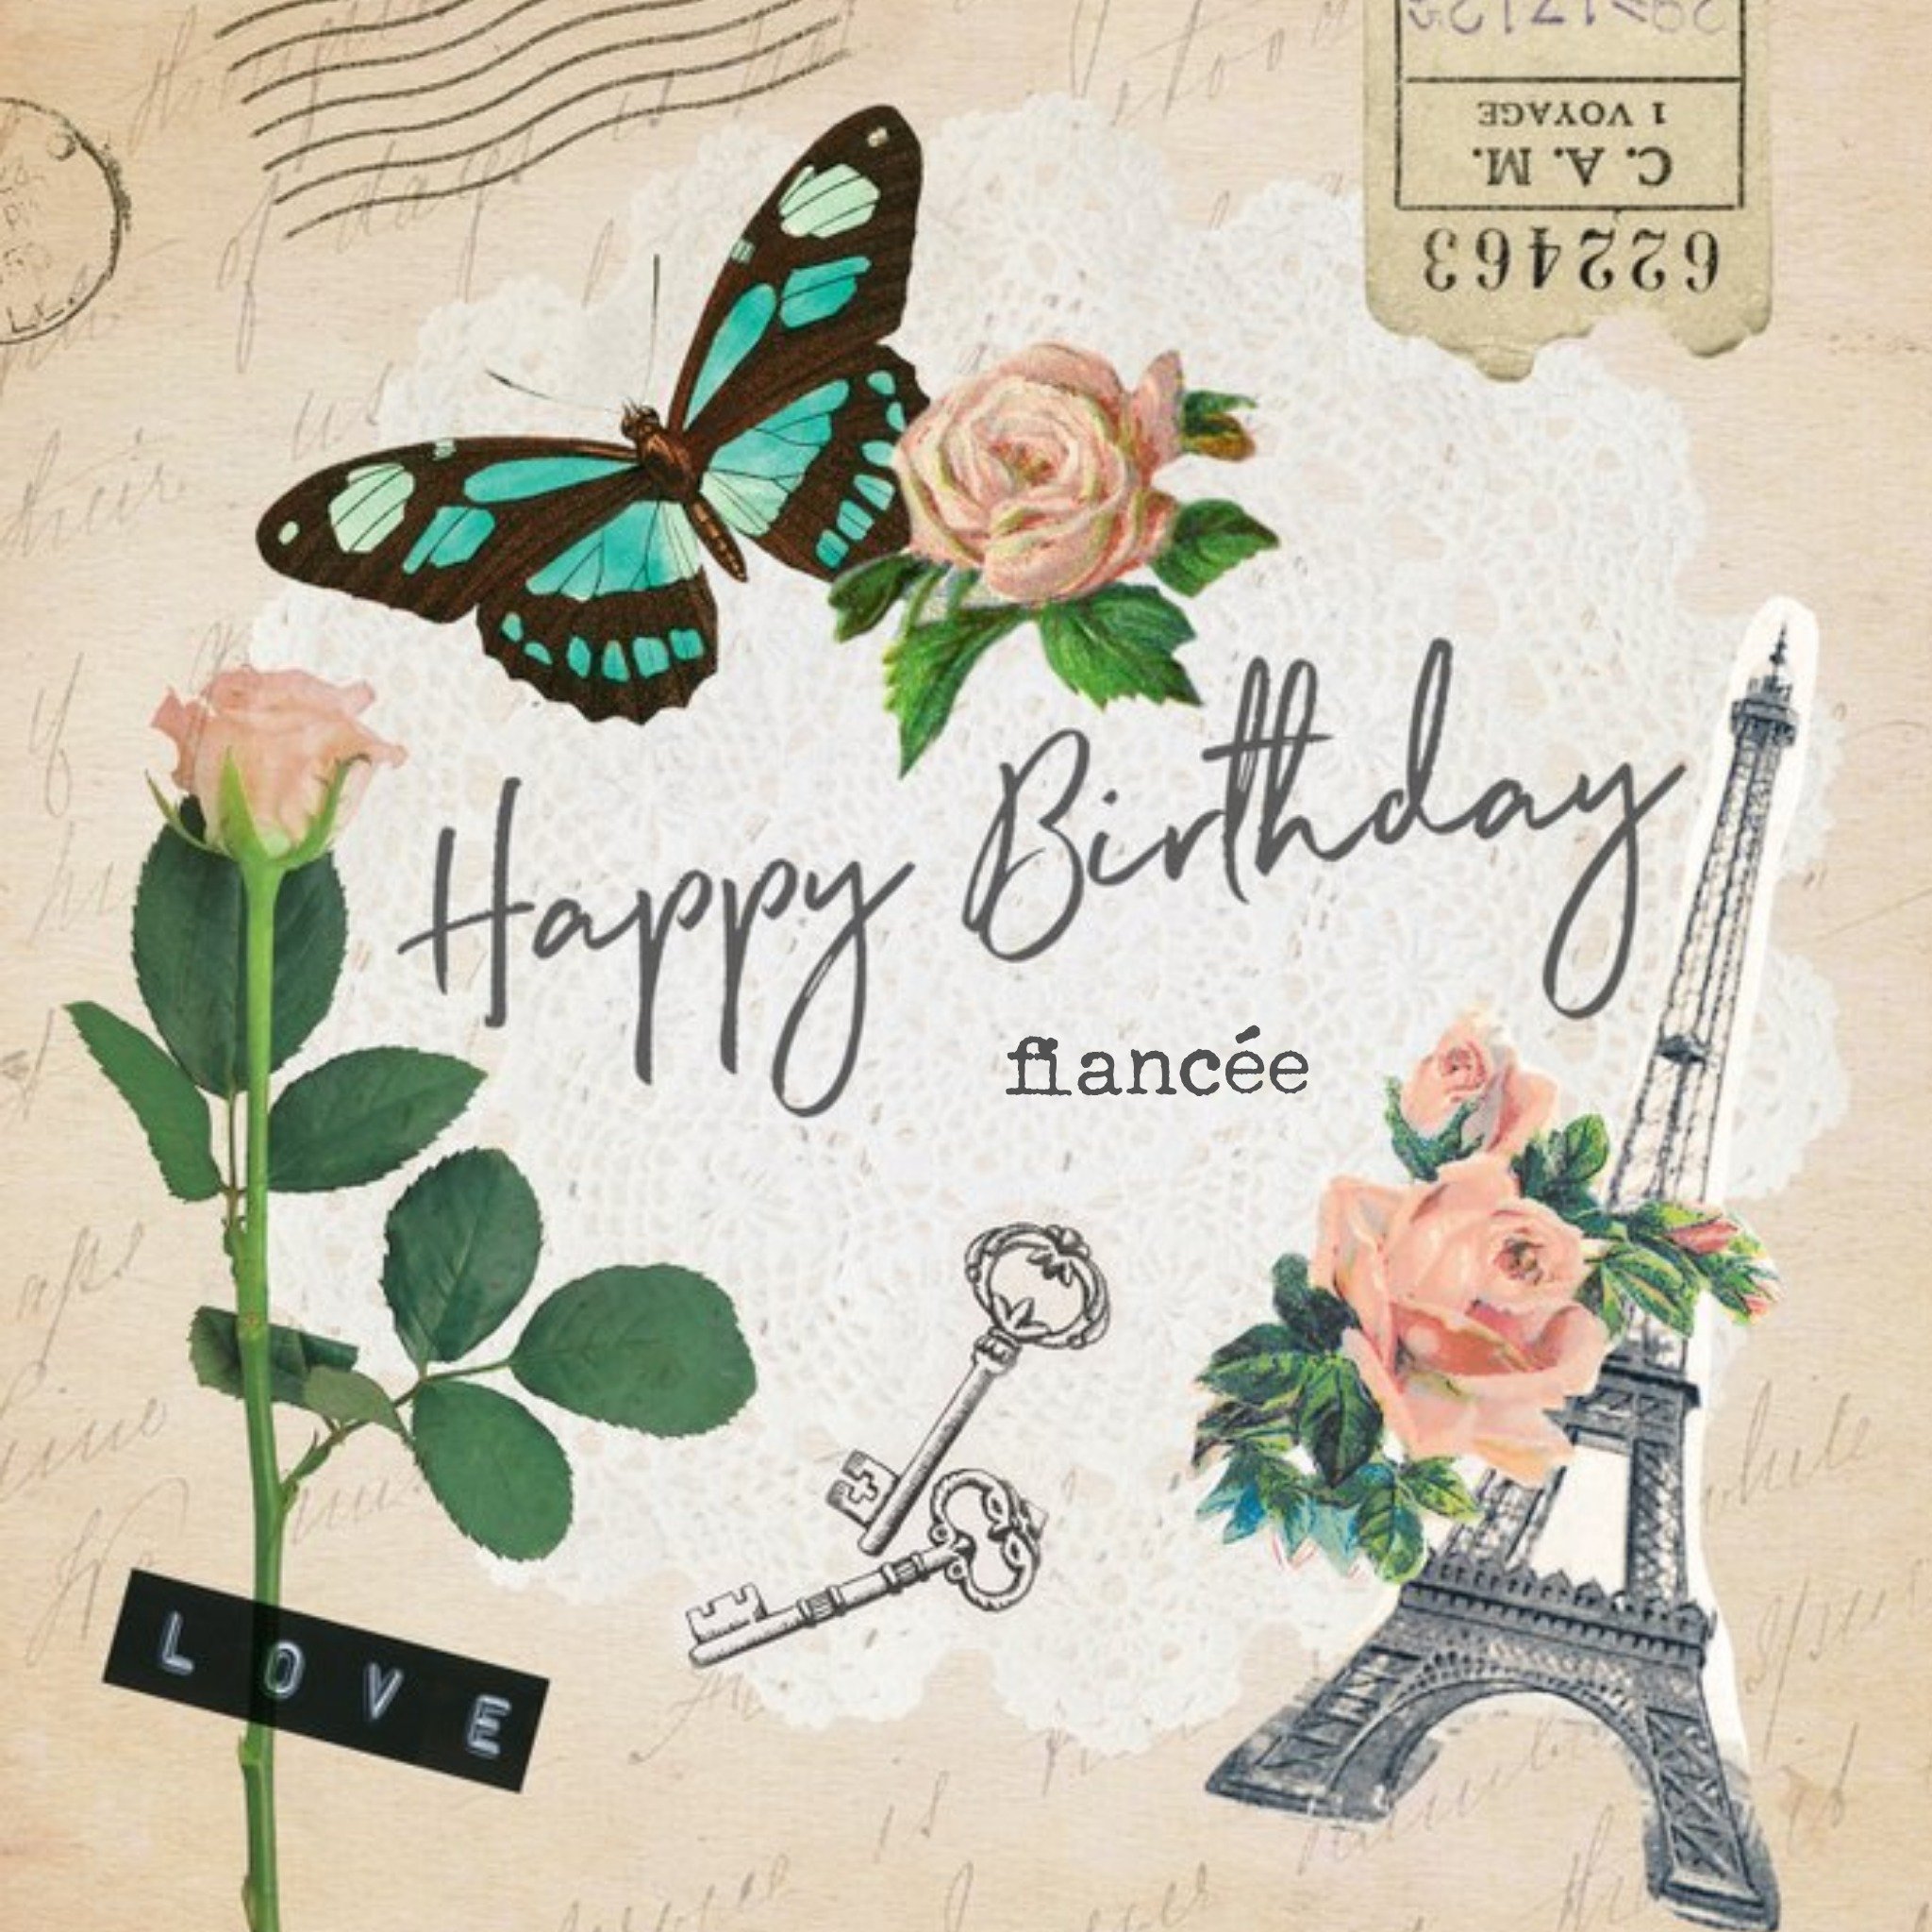 Moonpig Vintage Paris Birthday Card - Traditional Happy Birthday Card For Fiancee, Square